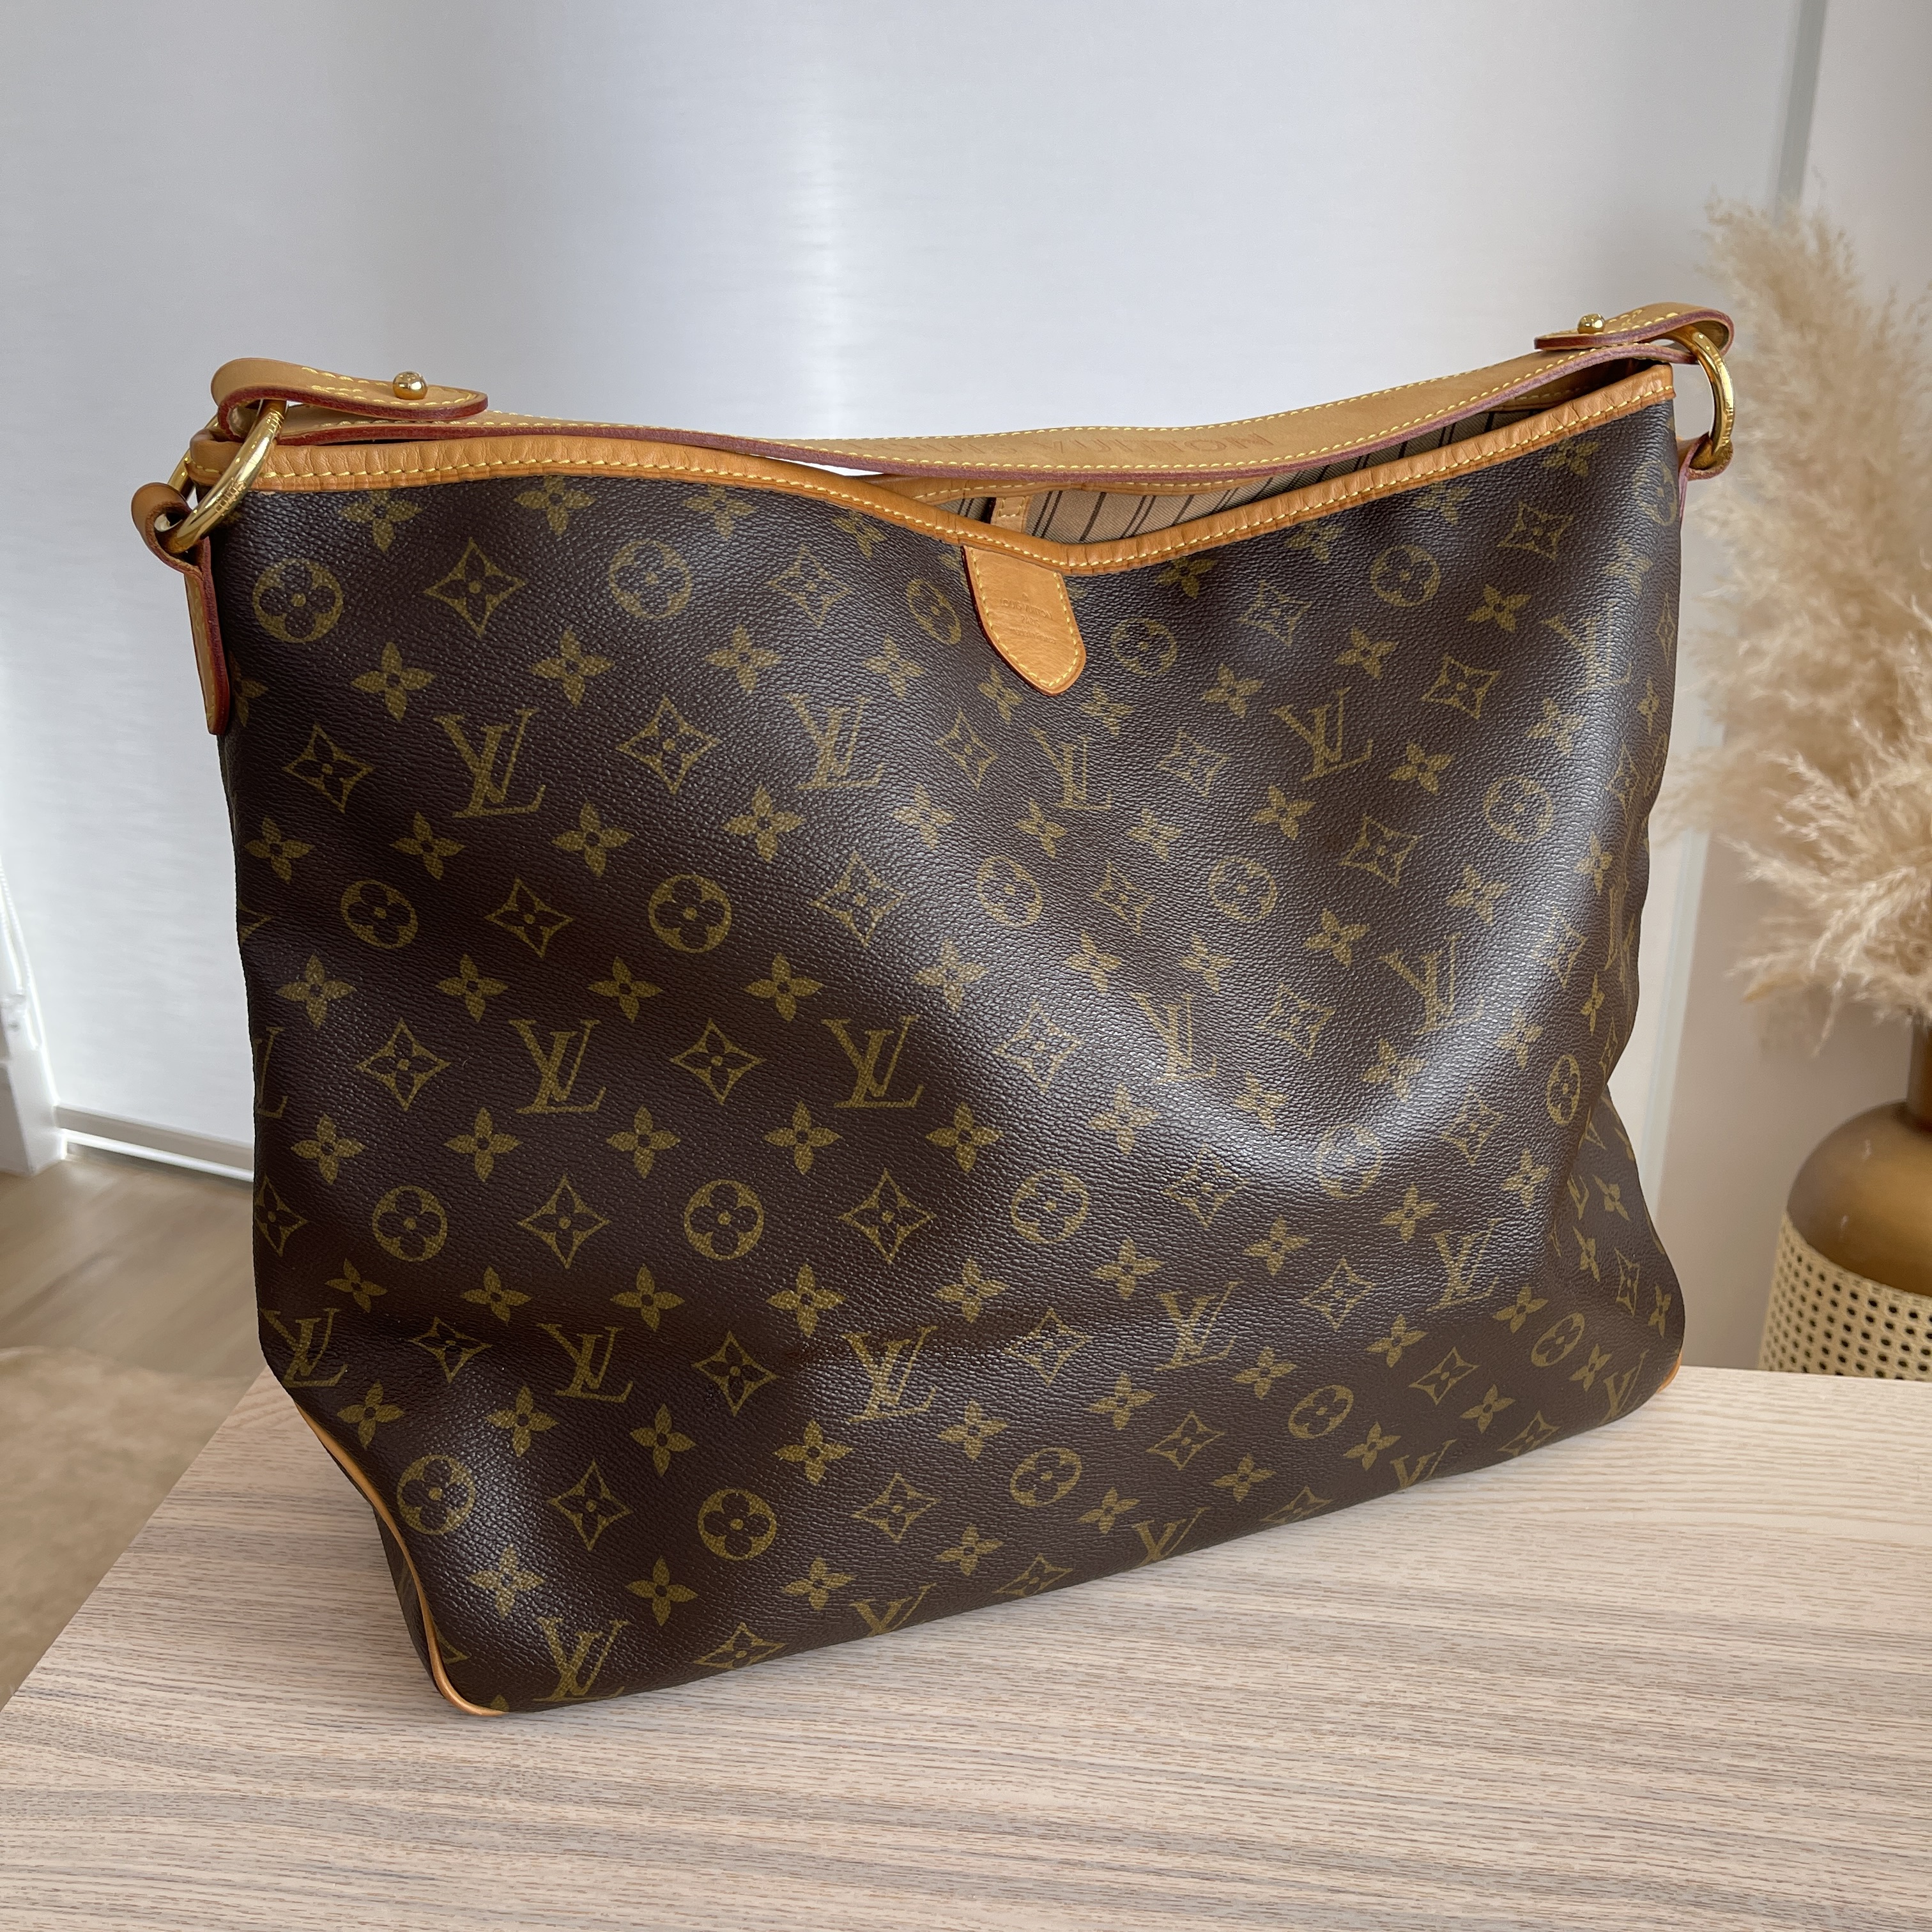 HOW TO SPOT AN AUTHENTIC LOUIS VUITTON DELIGHTFUL PM size and